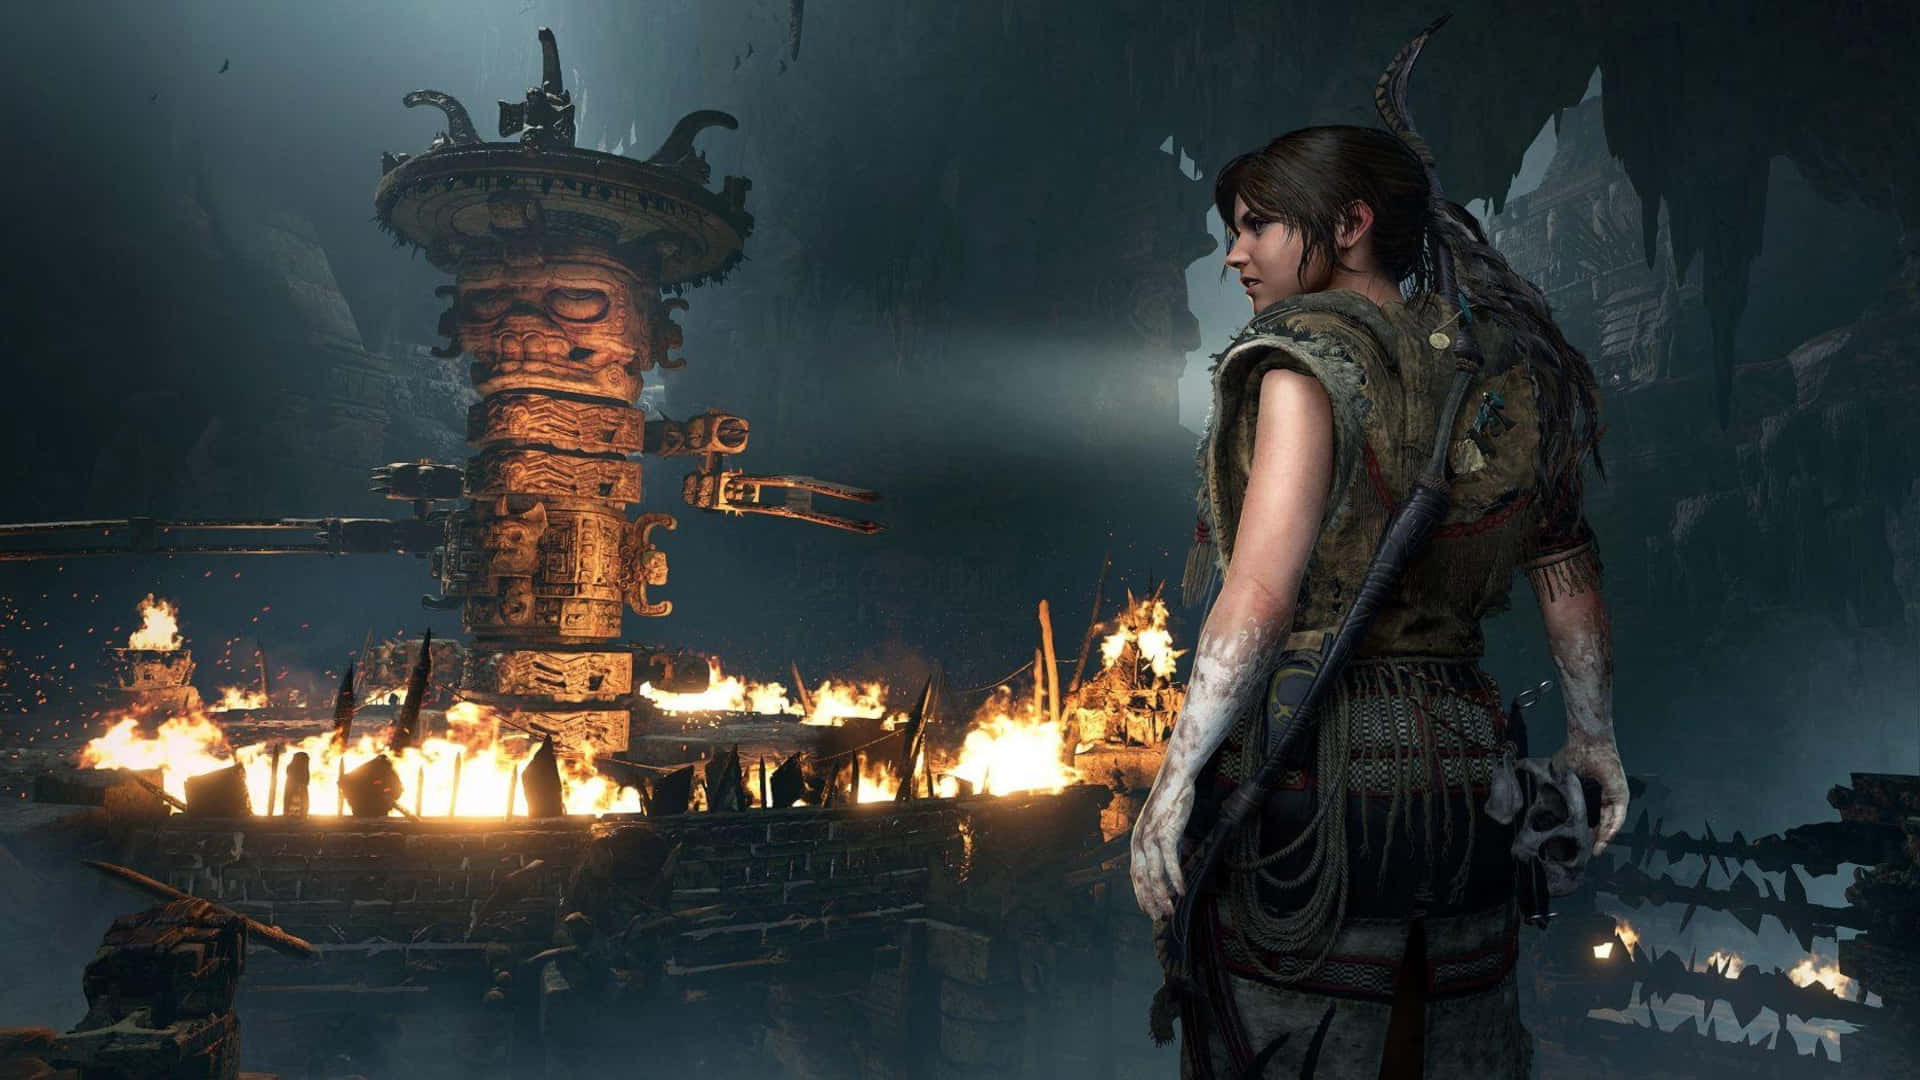 Lara Croft Faces Her Greatest Challenge Yet in Shadow Of The Tomb Raider